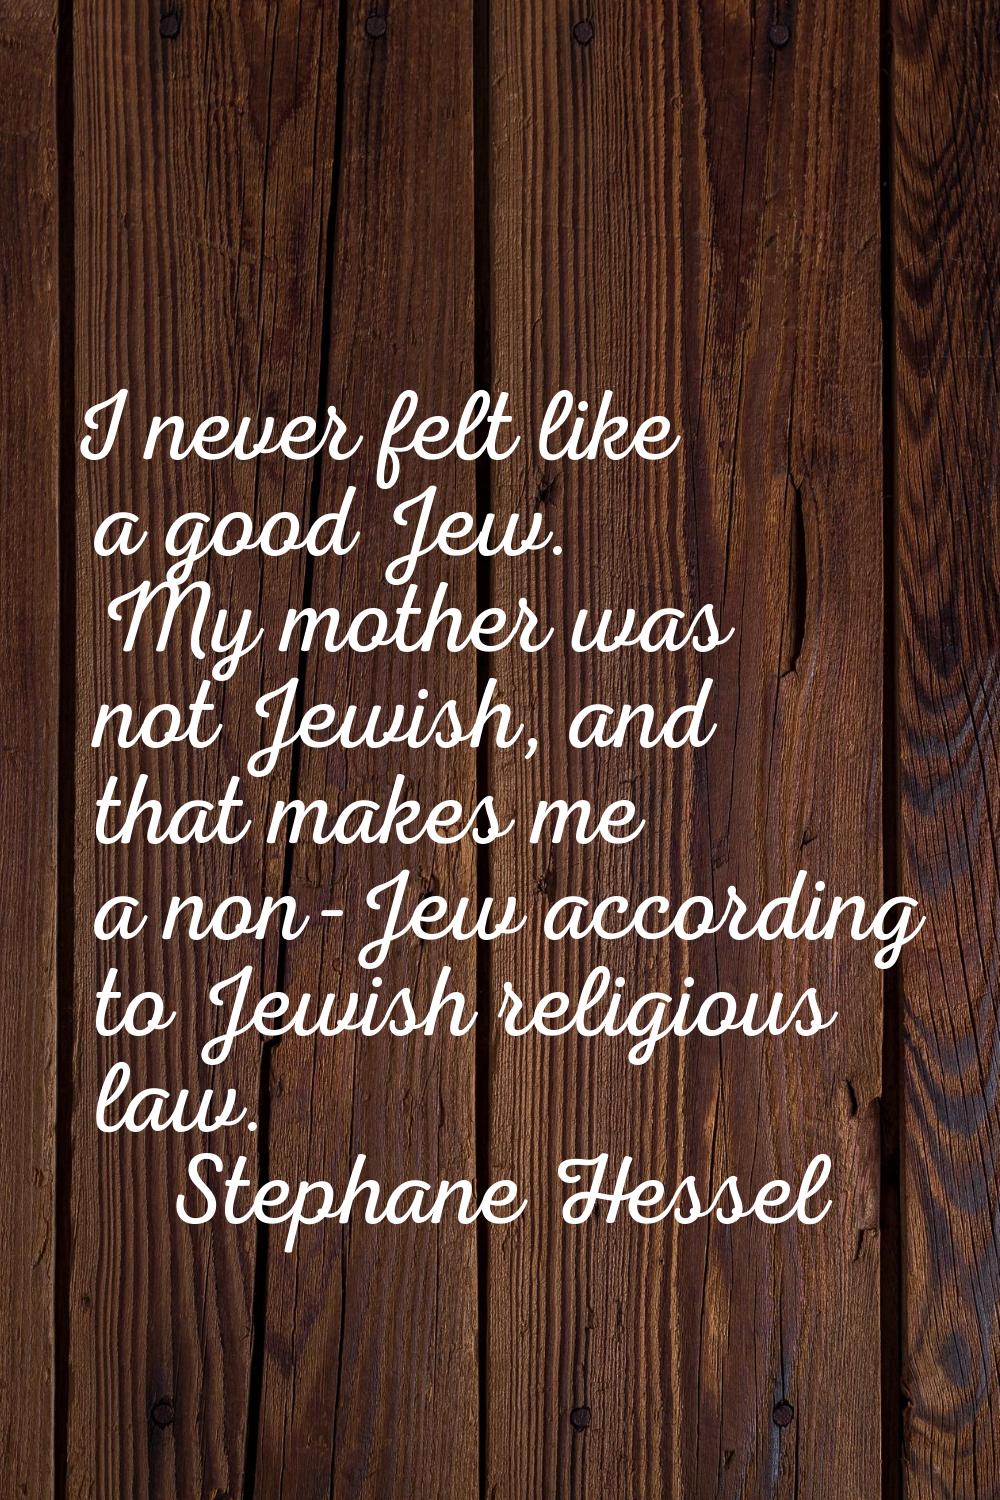 I never felt like a good Jew. My mother was not Jewish, and that makes me a non-Jew according to Je